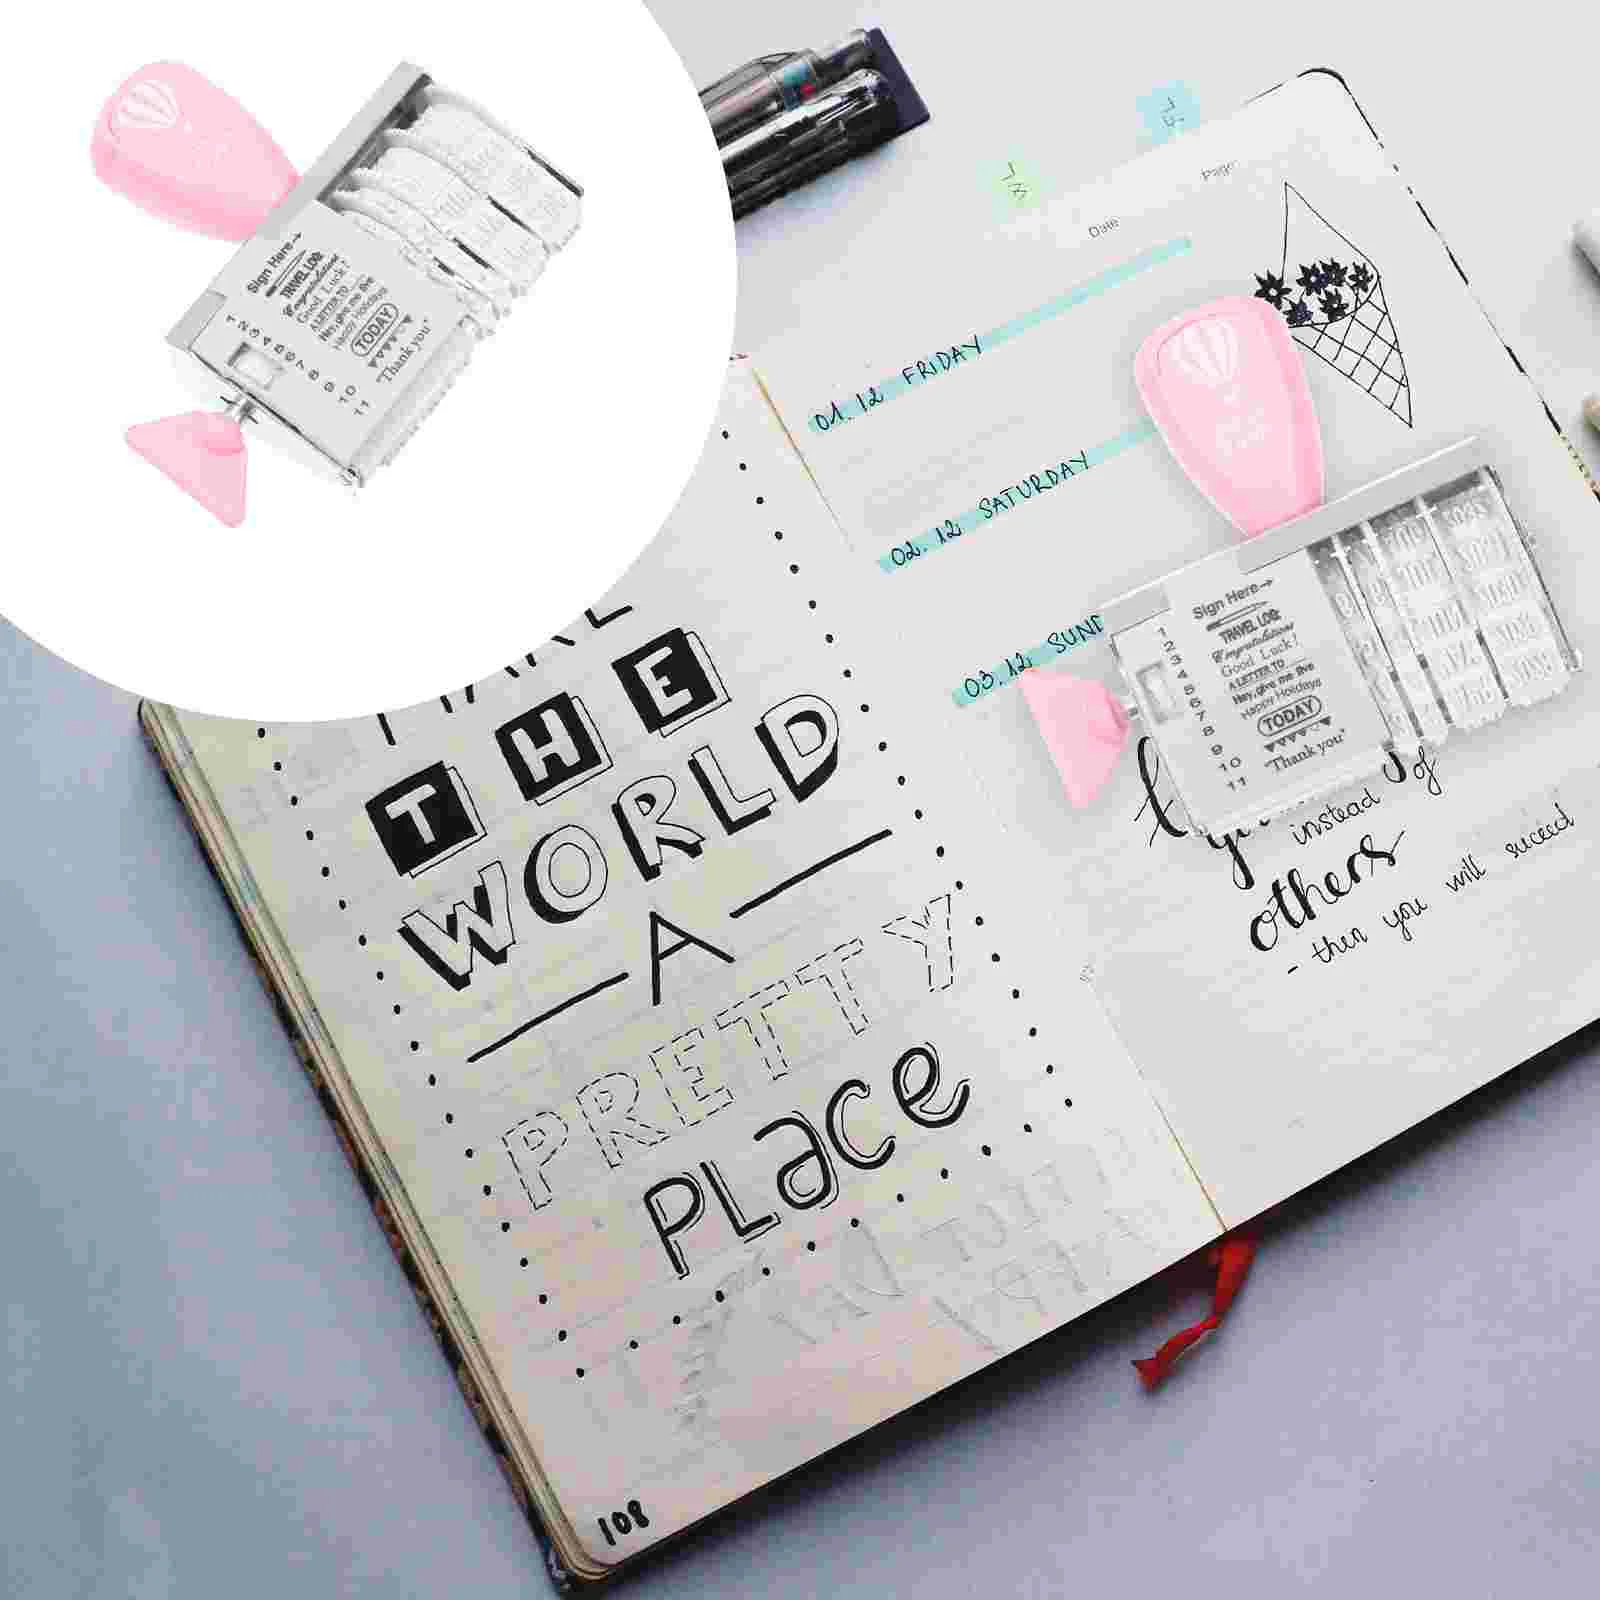 Seal Postage Stamps DIY Planner Knob Useful Date Plastic Rollers Scrapbook Supplies School Stationery 2 sheets morandi expression paper sticker decorative scrapbook planner stickers kawaii stationery school supplies papeleria